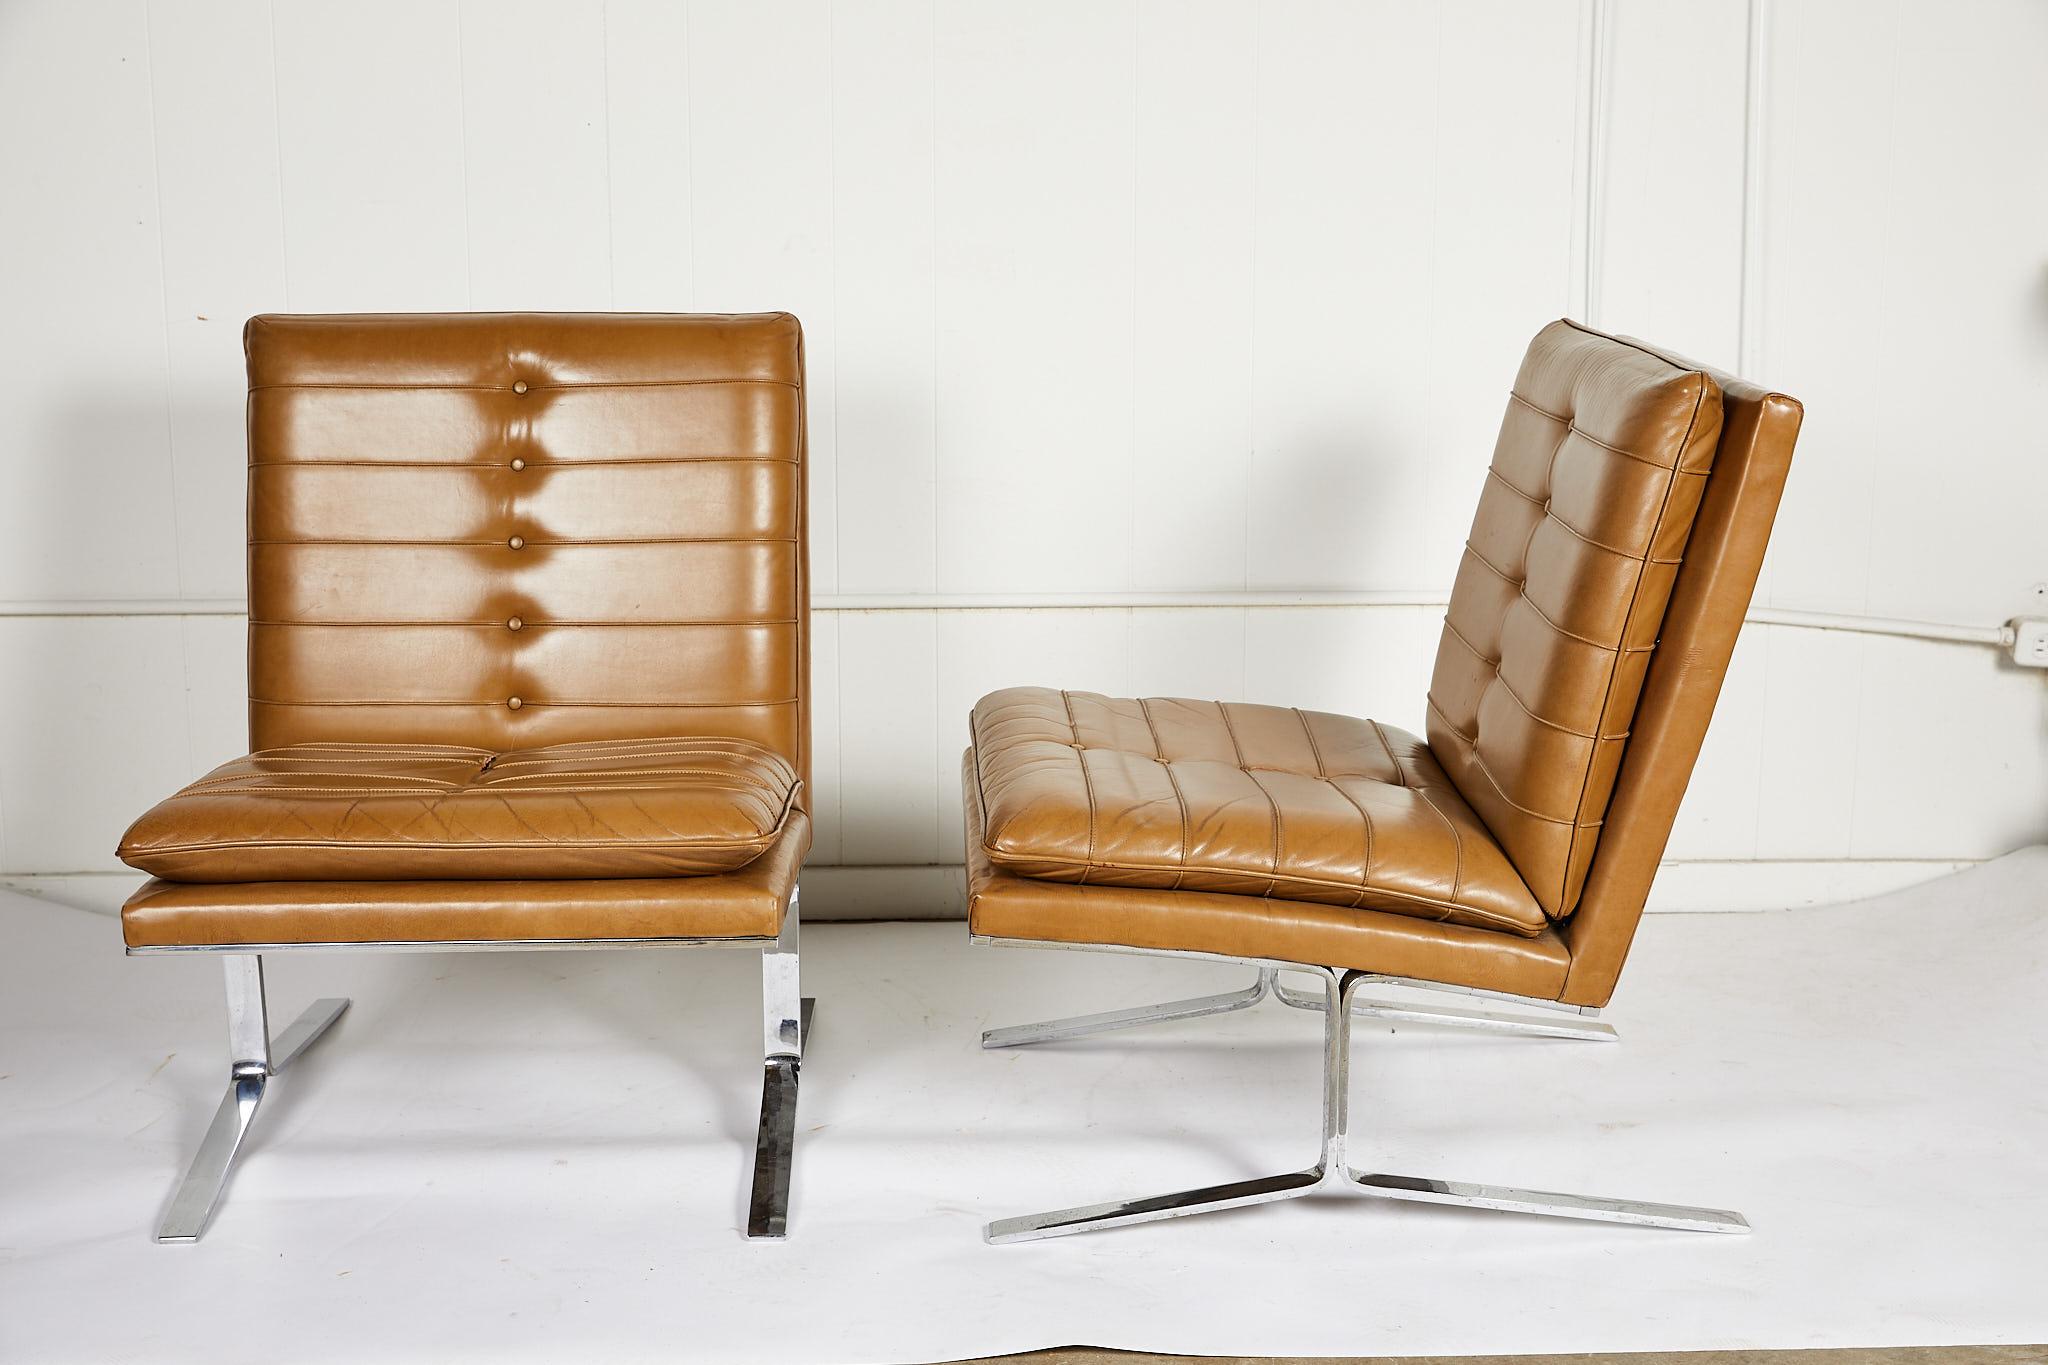 Stylish pair of American midcentury armless lounge chairs with channeled camel leather seats and backs, on bright chrome cantilevered bases. The design is influenced by the iconic Barcelona chair designed by Mies van der Rohe. The chairs were